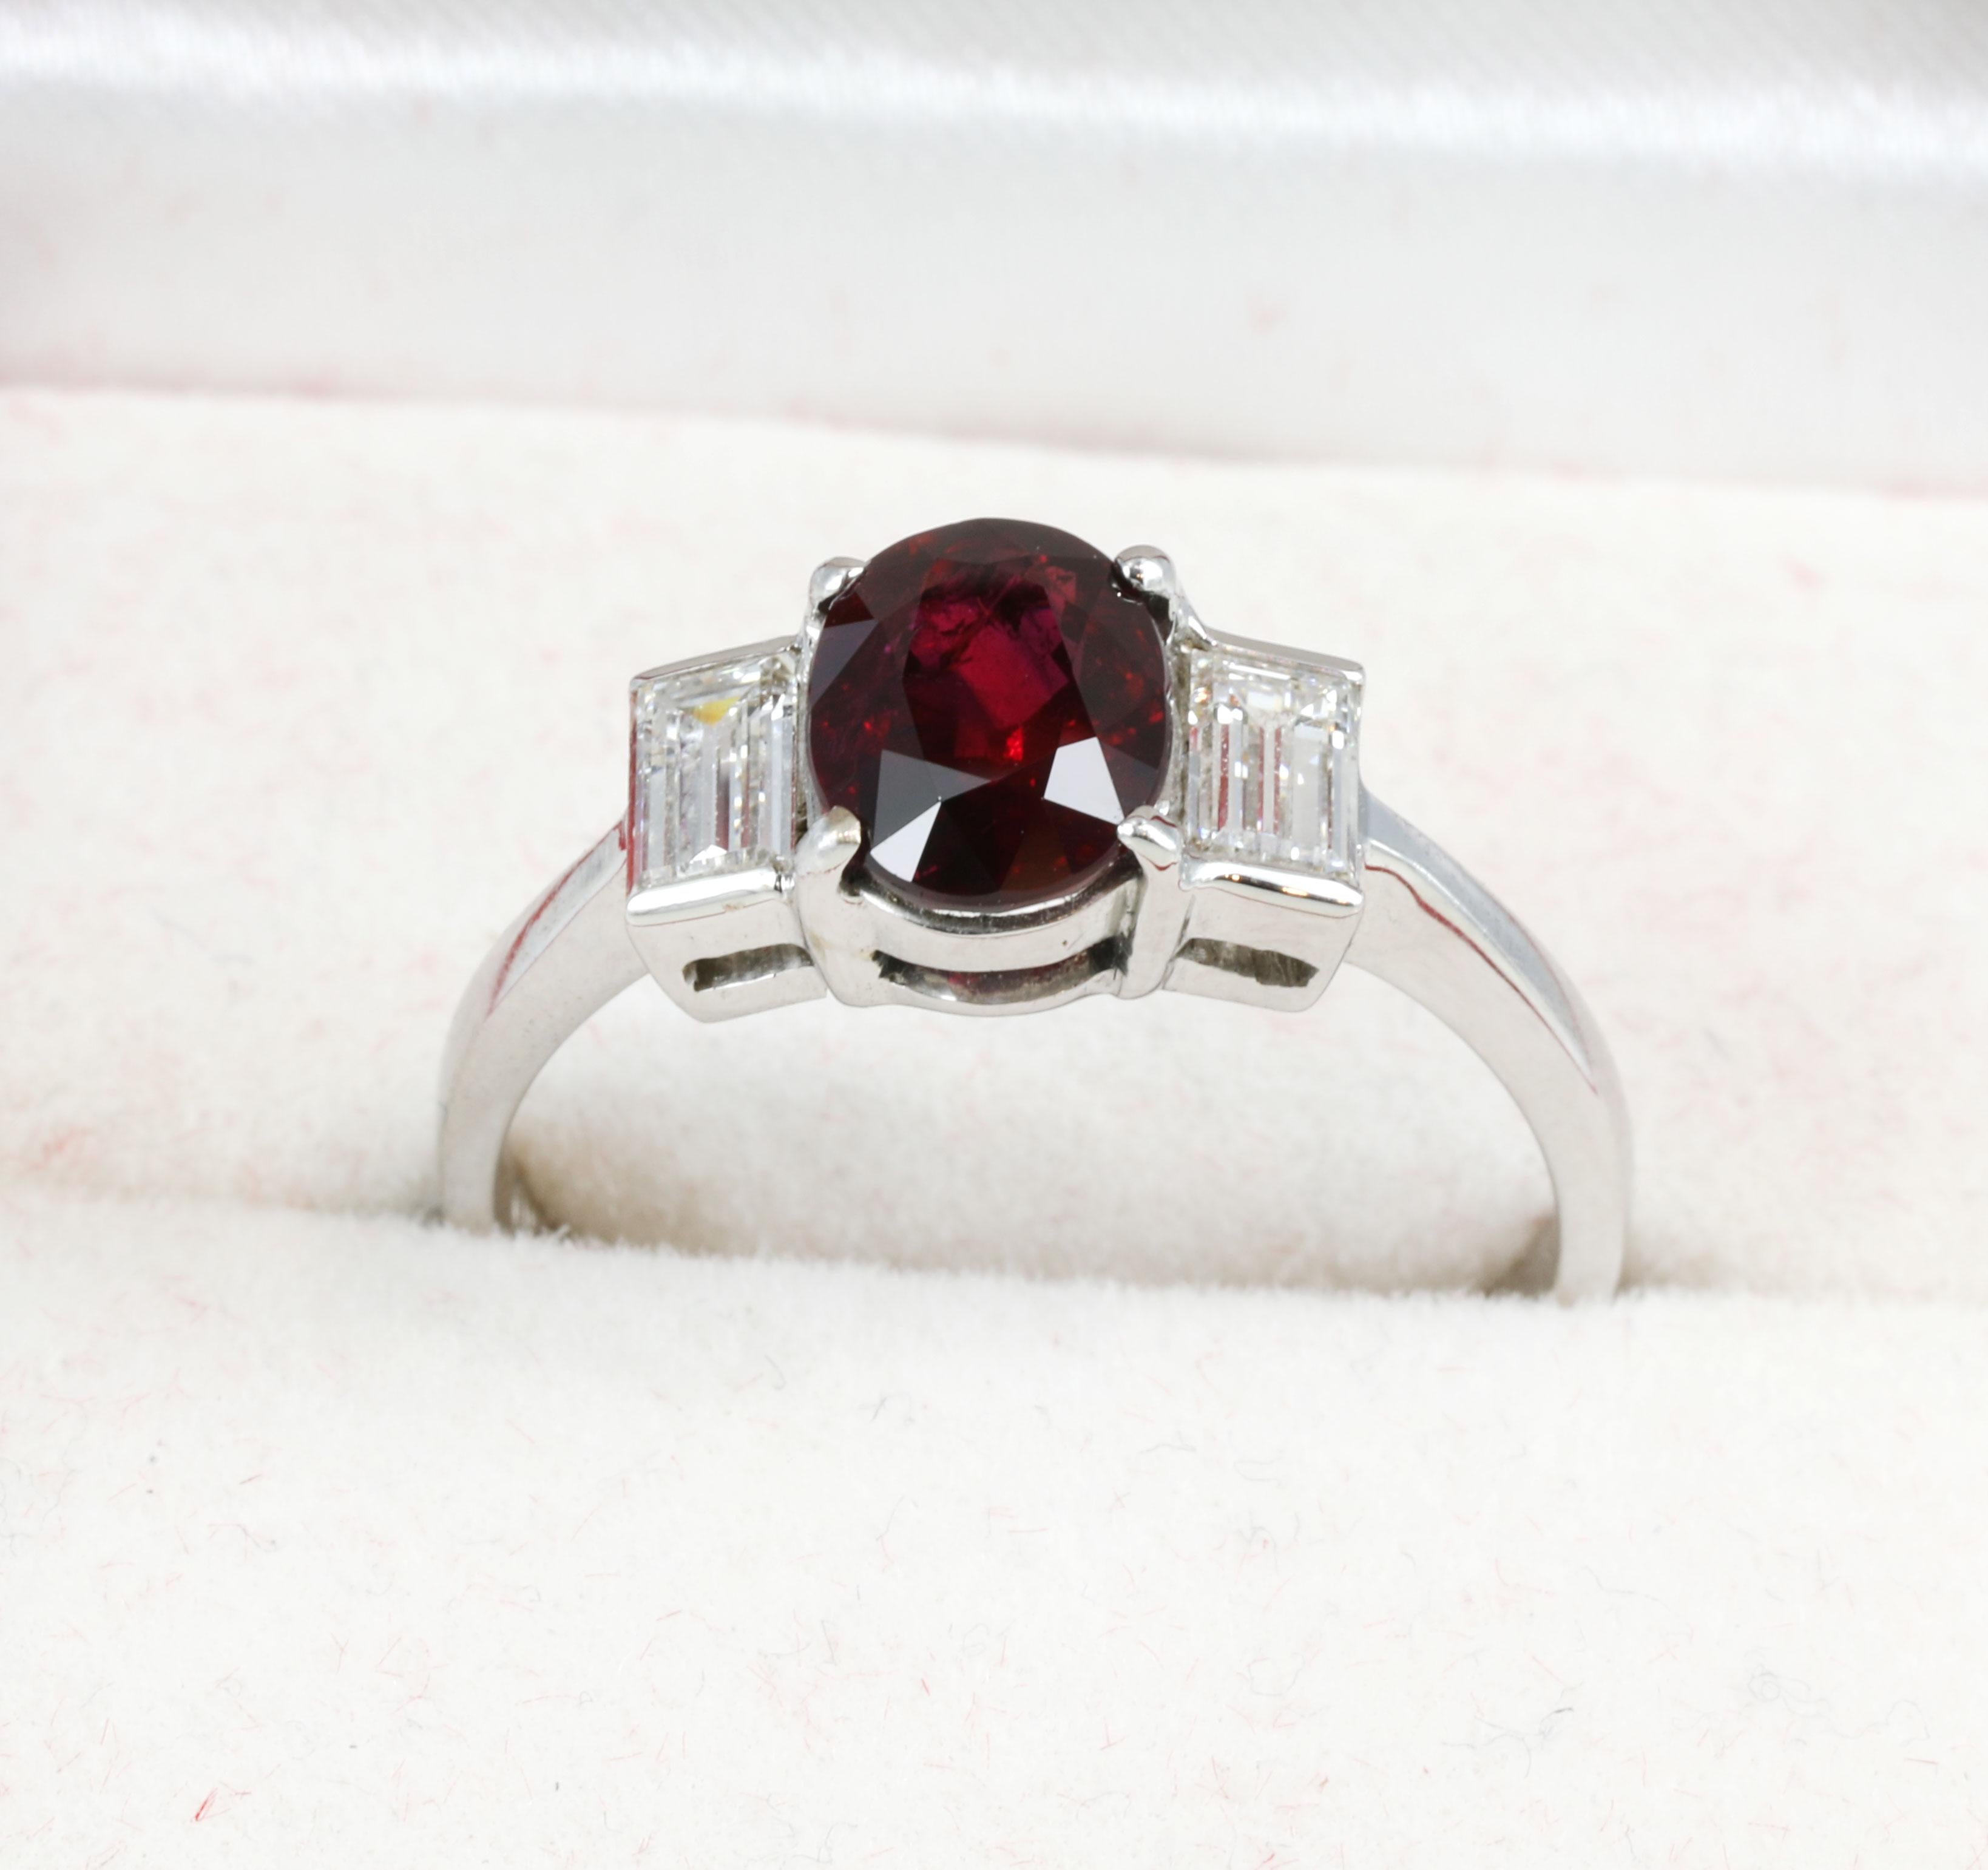 Modern Unheated 1.54 Carat “Pigeon’s Blood” Ruby & Diamond 18K Gold Ring, GIA Certified For Sale